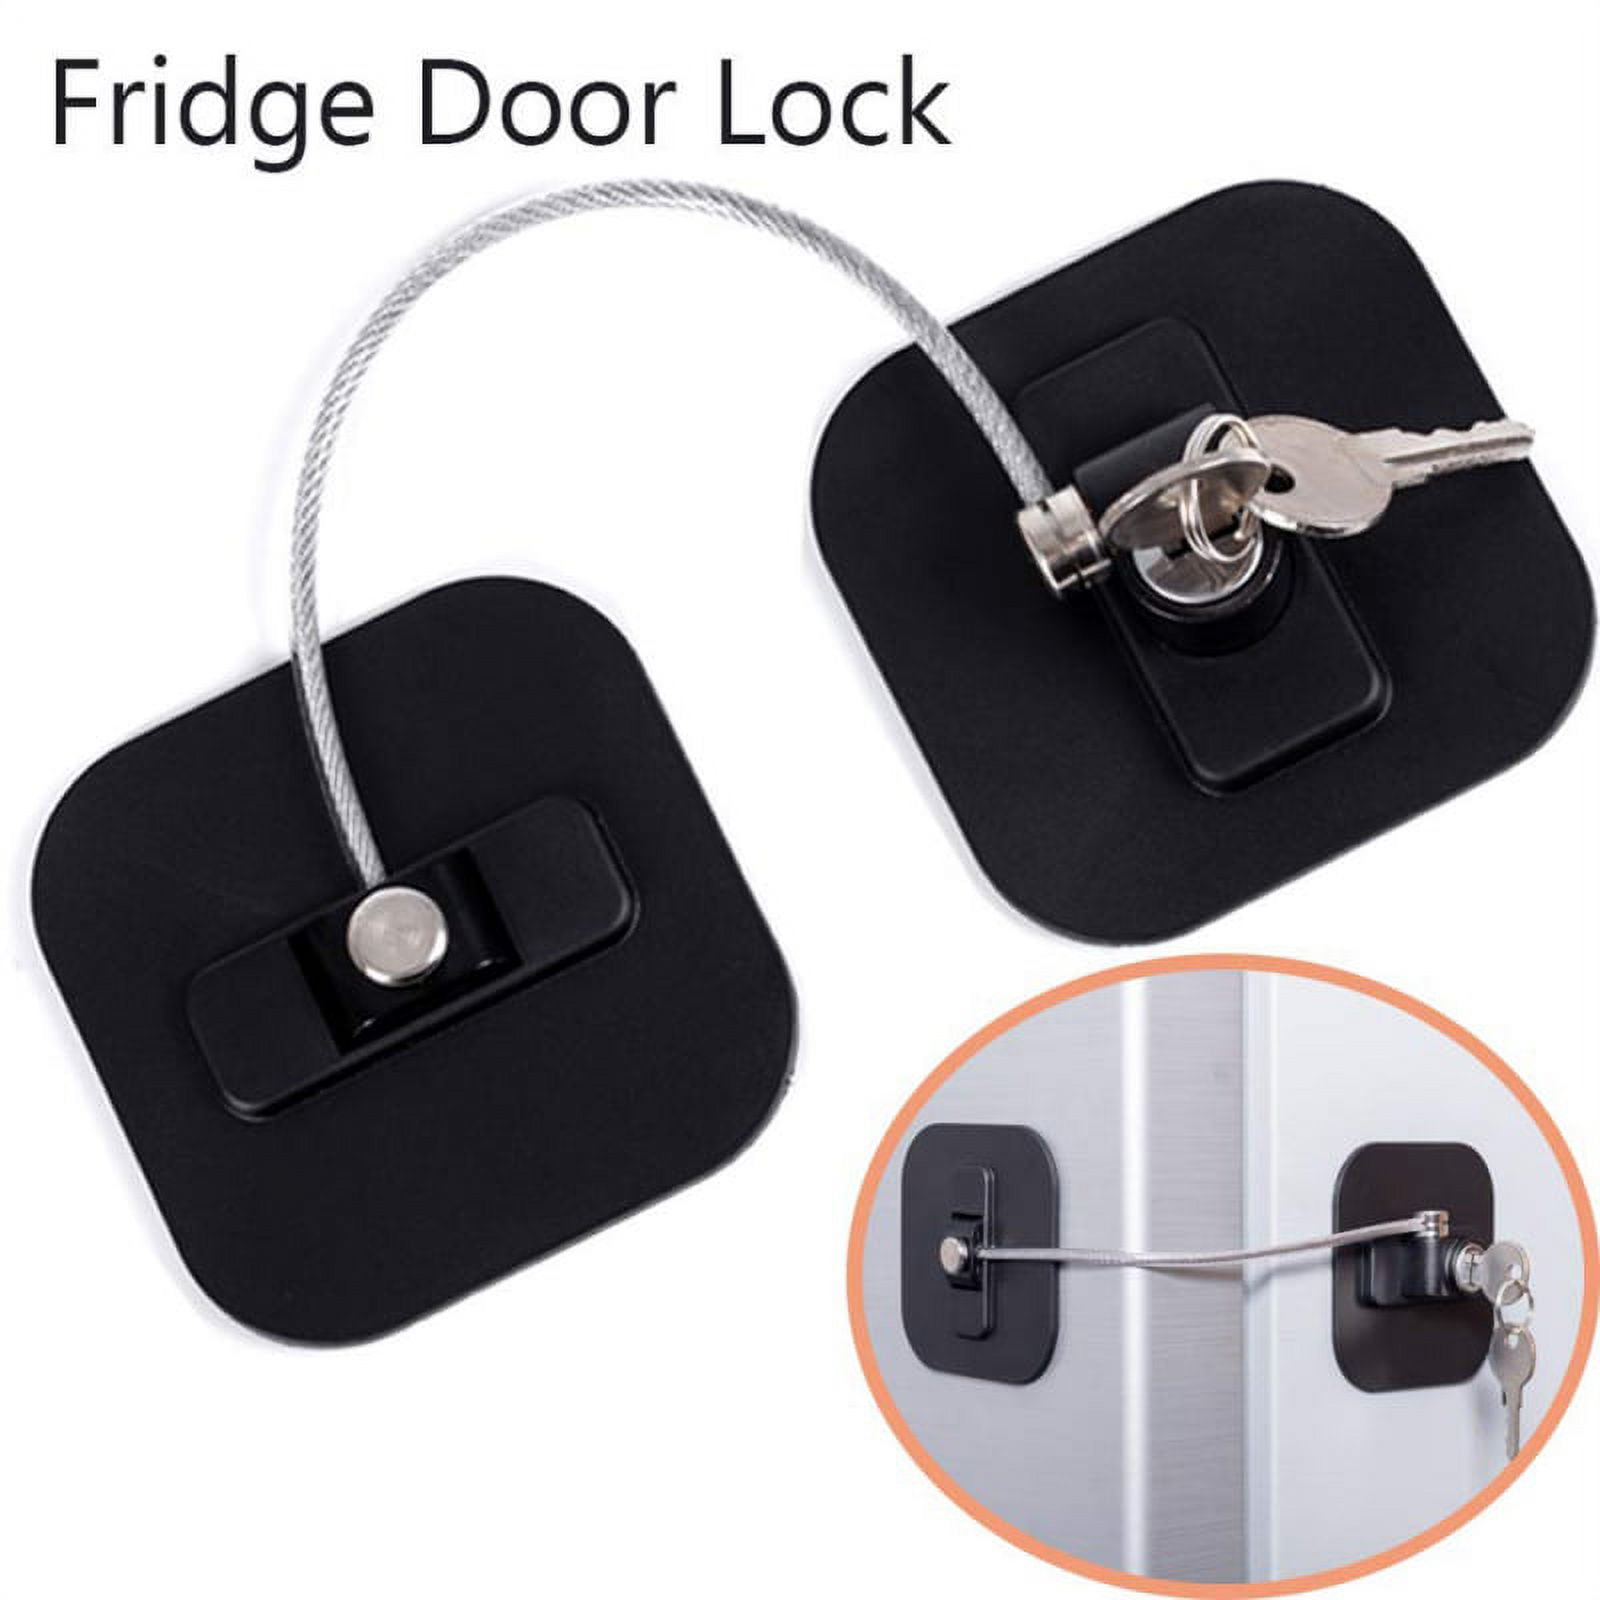 Baby Products Online - Refrigerator lock, refrigerator lock with keys,  freezer lock and refrigerator lock for protection against children (refrigerator  lock - black 1 package) - Kideno